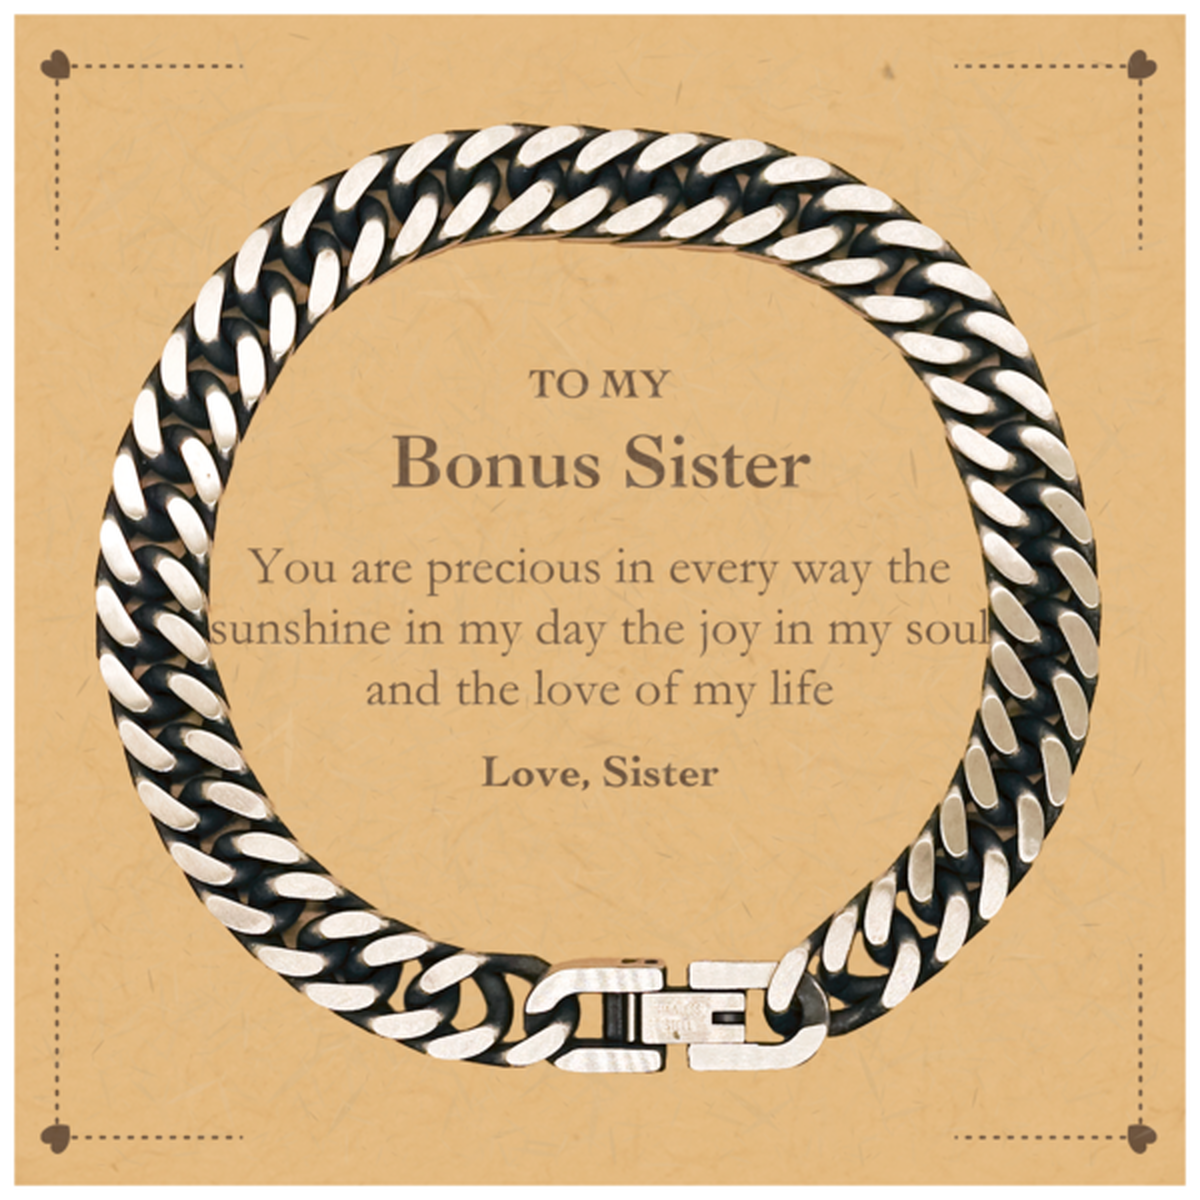 Graduation Gifts for Bonus Sister Cuban Link Chain Bracelet Present from Sister, Christmas Bonus Sister Birthday Gifts Bonus Sister You are precious in every way the sunshine in my day. Love, Sister